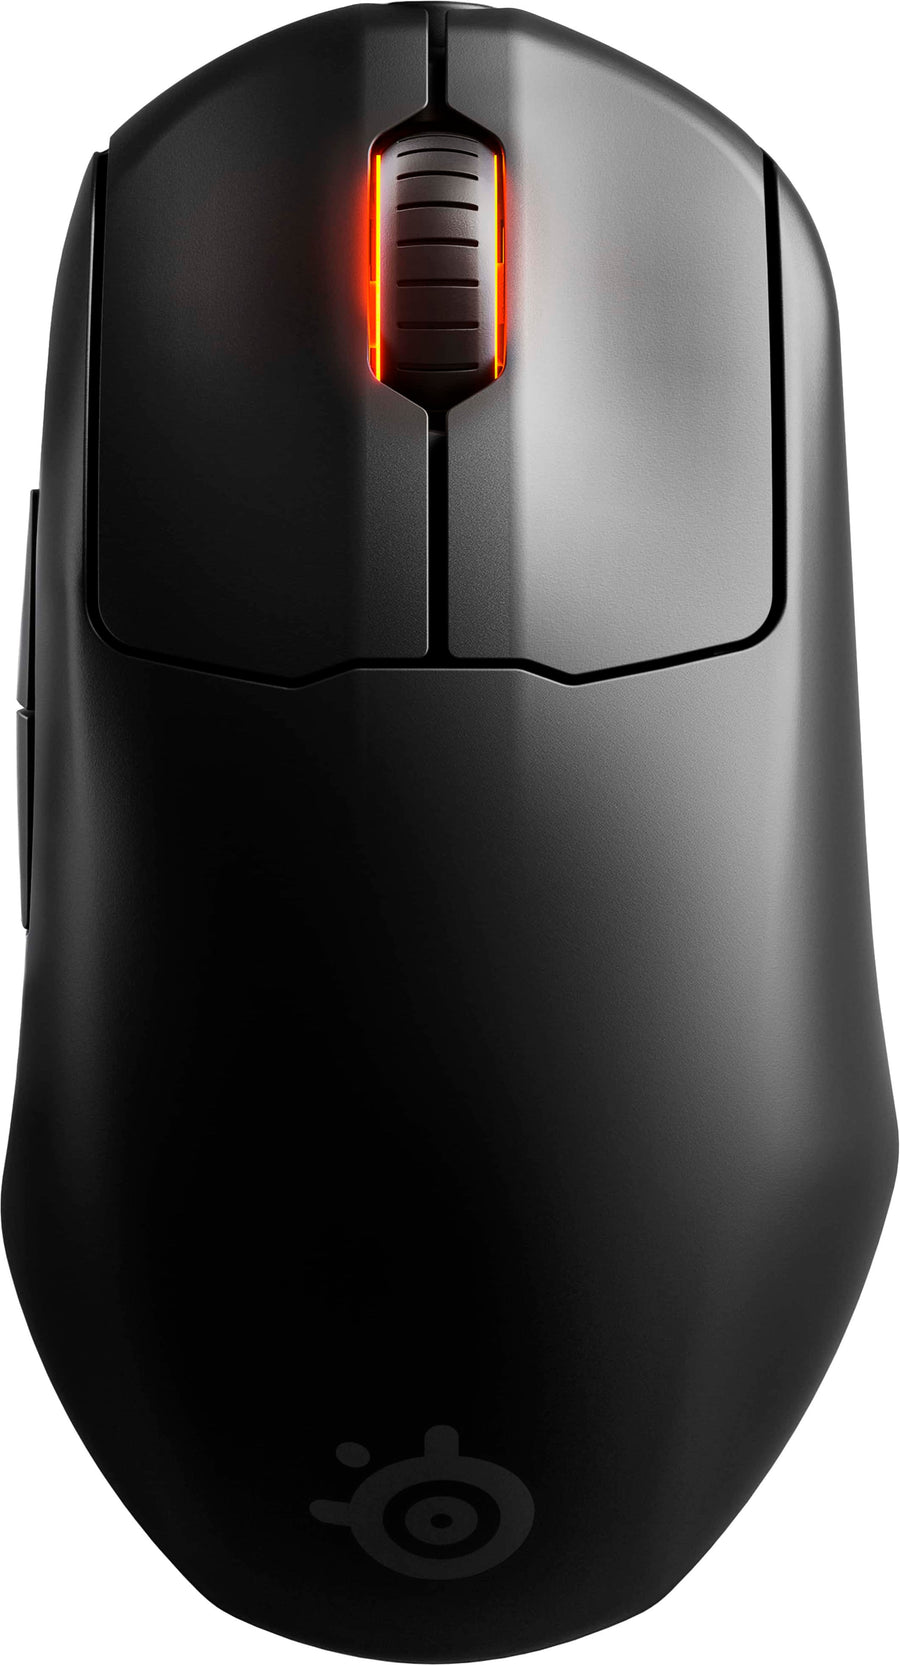 SteelSeries - Prime Esport Mini Lightweight Wireless Optical Gaming Mouse With Over 100 Hour Battery Life - Black_0